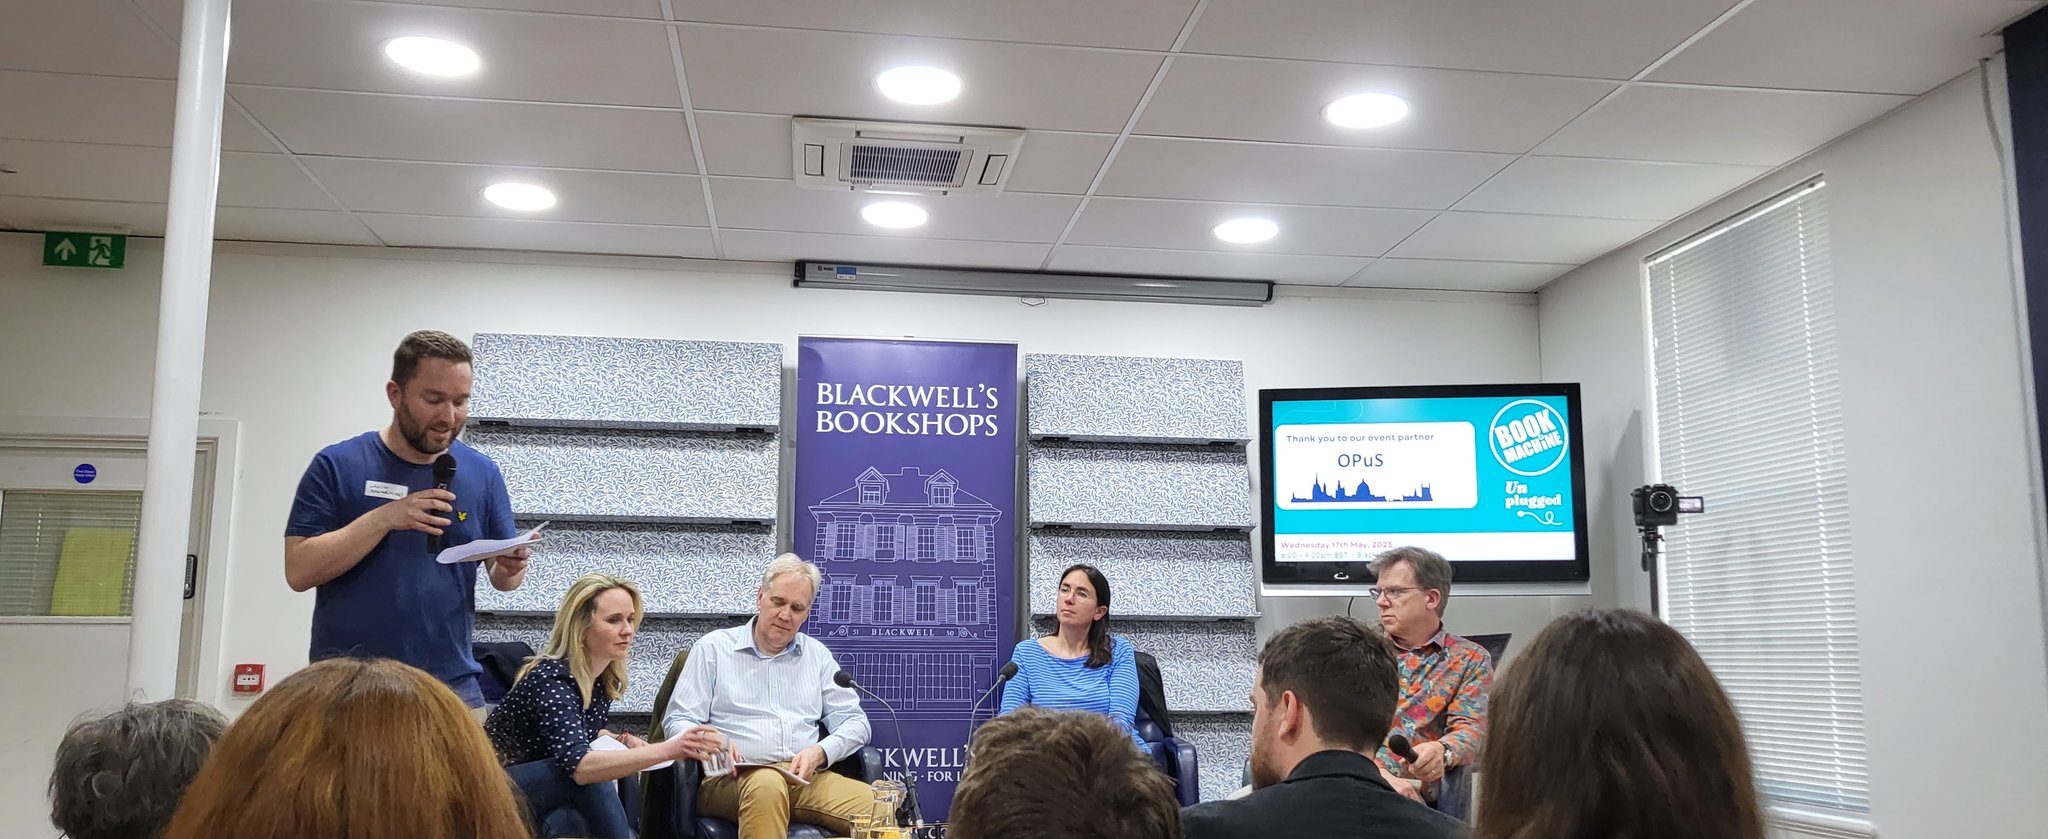 Panel of four adults being introduced by a speaker with a microphone at Blackwell's Bookshop. The image is taken from the audience.